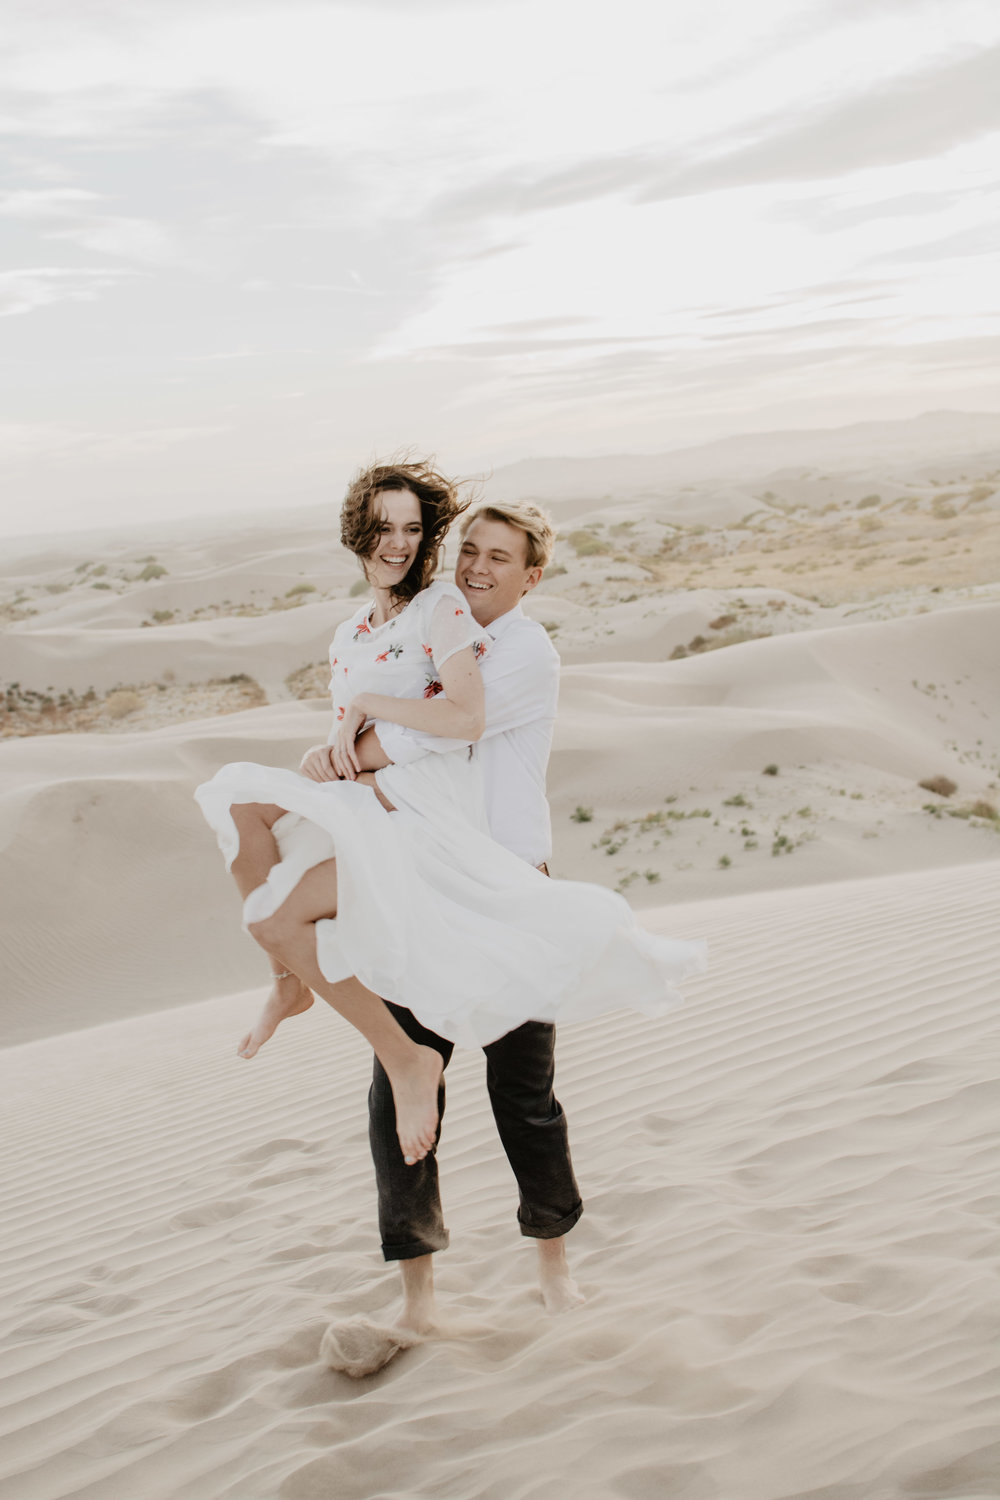 Jocilyn Bennett Photography | Engagement Pose Ideas | Destination Wedding Photographer | Elopement Wedding Photographer | National Park Elopement Photography | Capturing raw and genuine emotion | Utah Photographer | Utah wedding Photographer | National Park Weddings | Outfit ideas for engagements | Engagements with sand | Adventure Photographer | What to wear guide for engagement | Little sahara engagements | Location ideas for engagements |